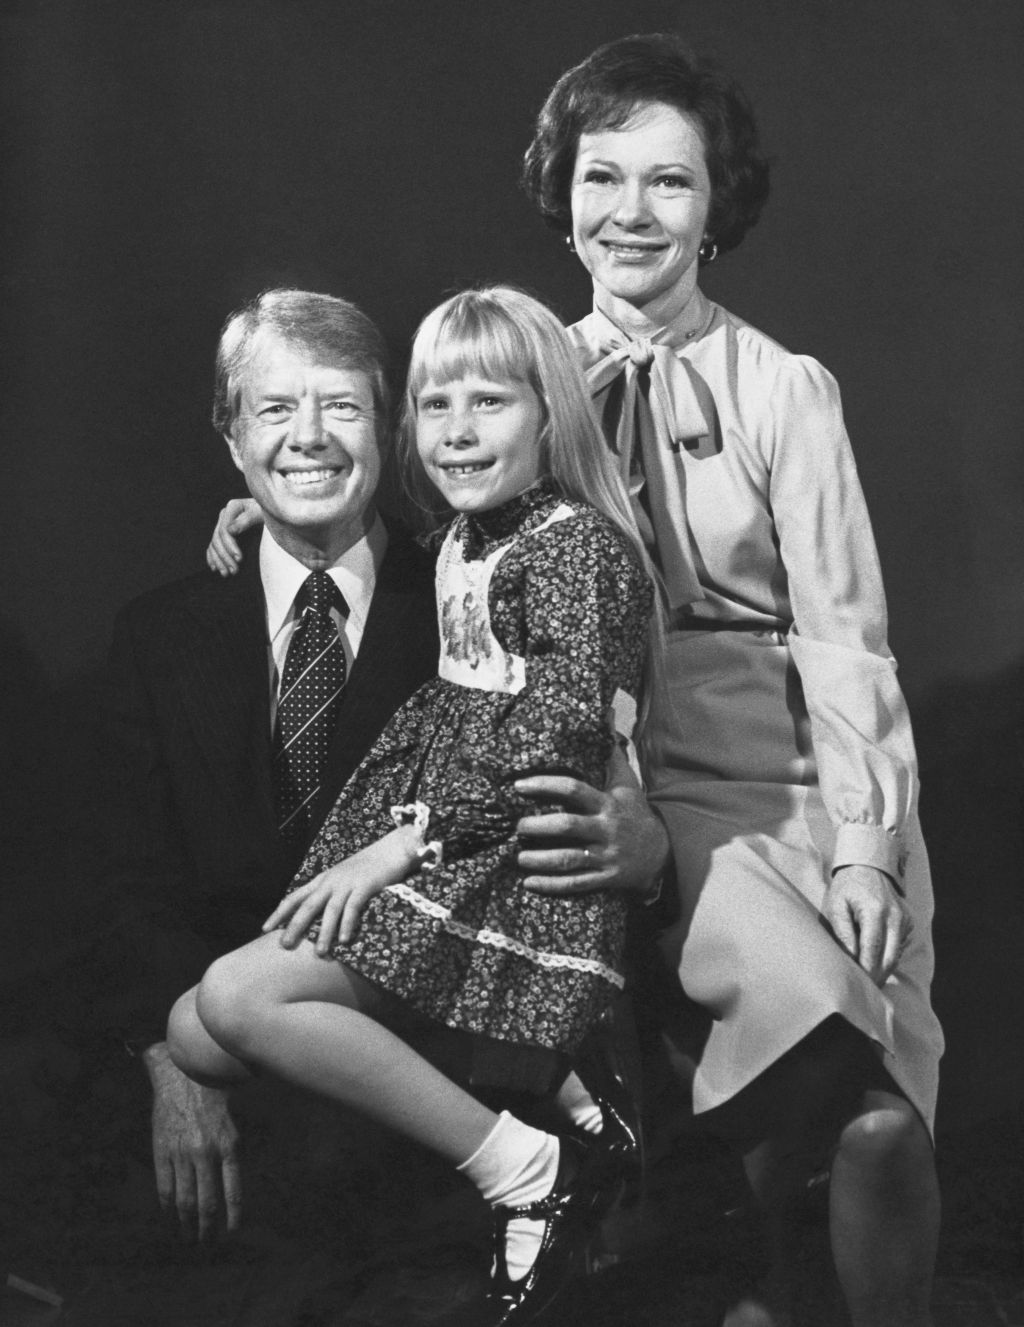 Jimmy Carter and Rosalynn Carter in 1976